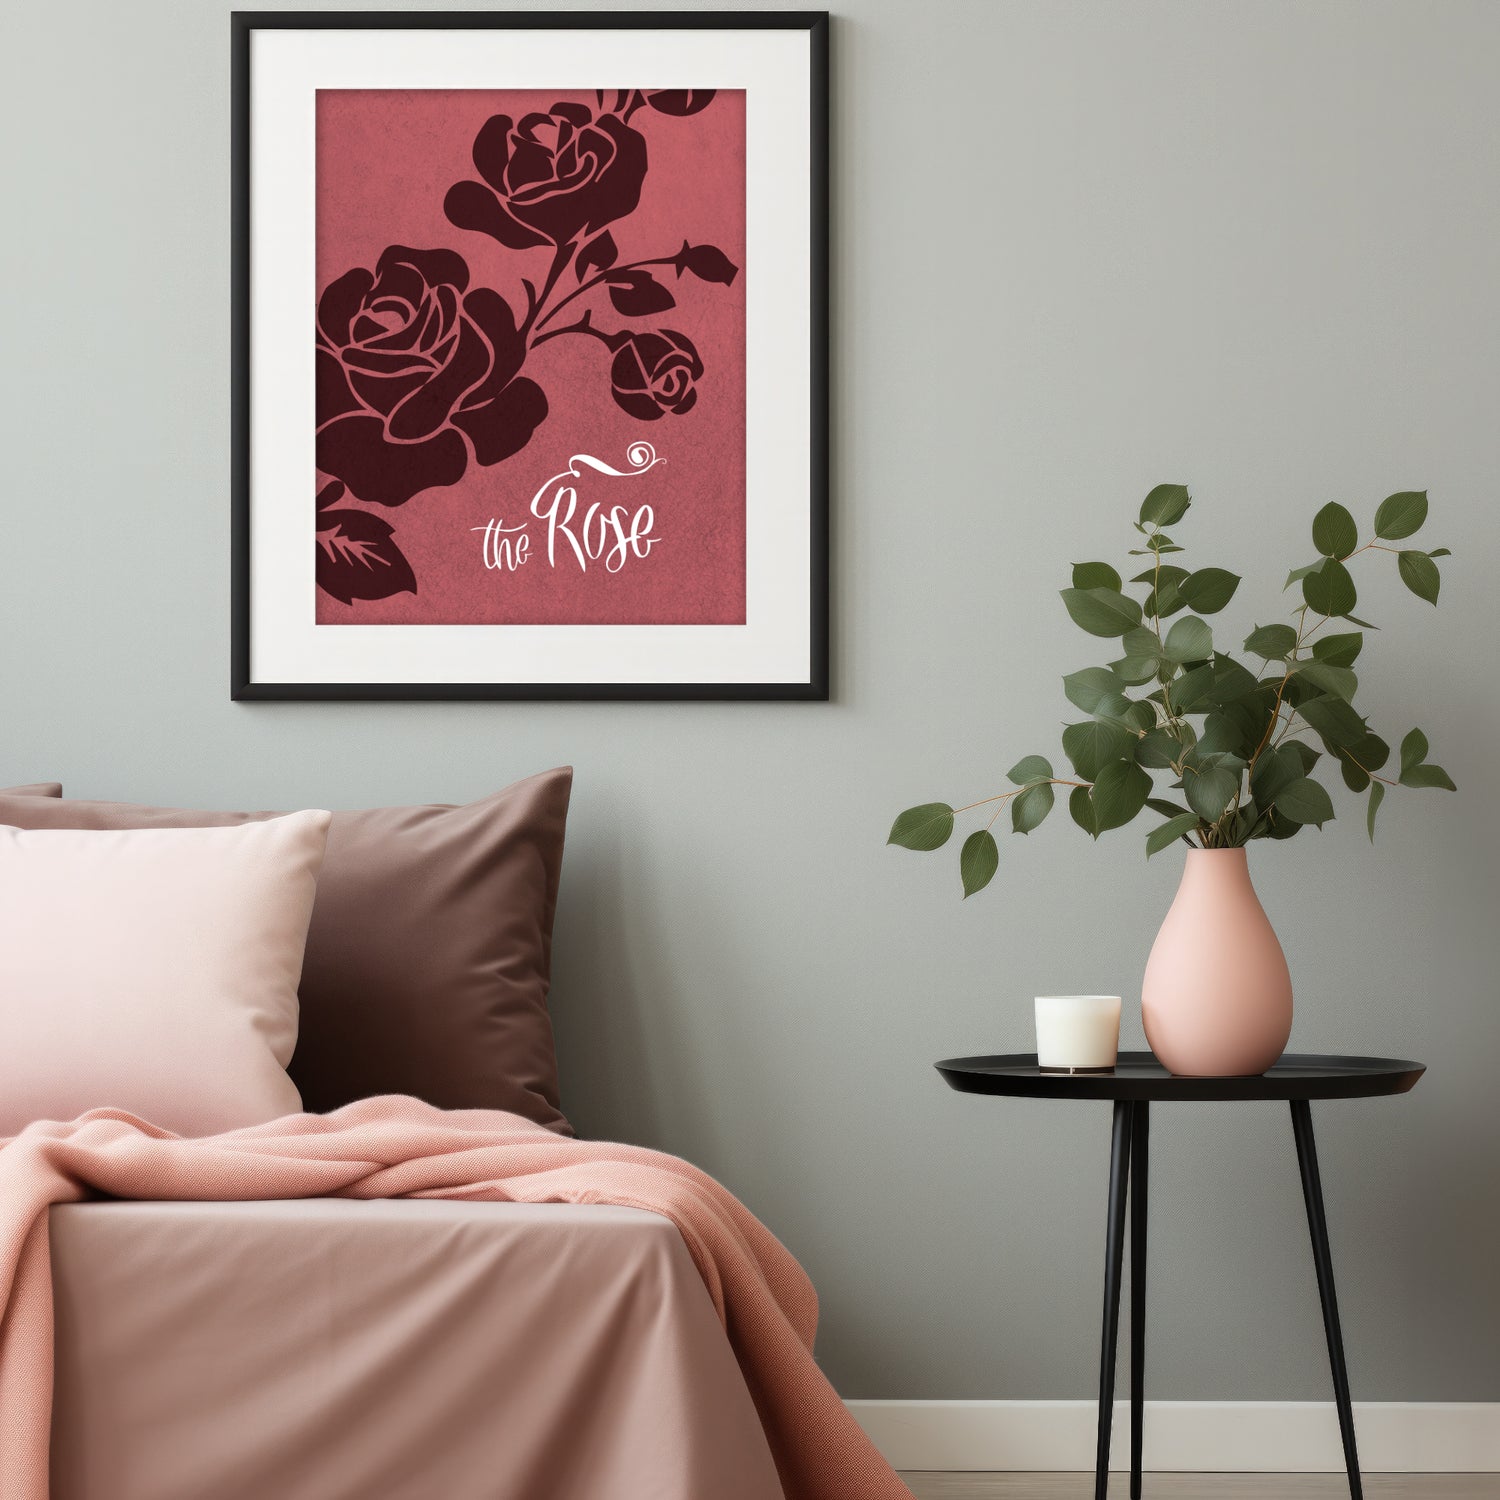 The Rose by Bette Midler - Song Lyric Inspired Wall Art Print Poster